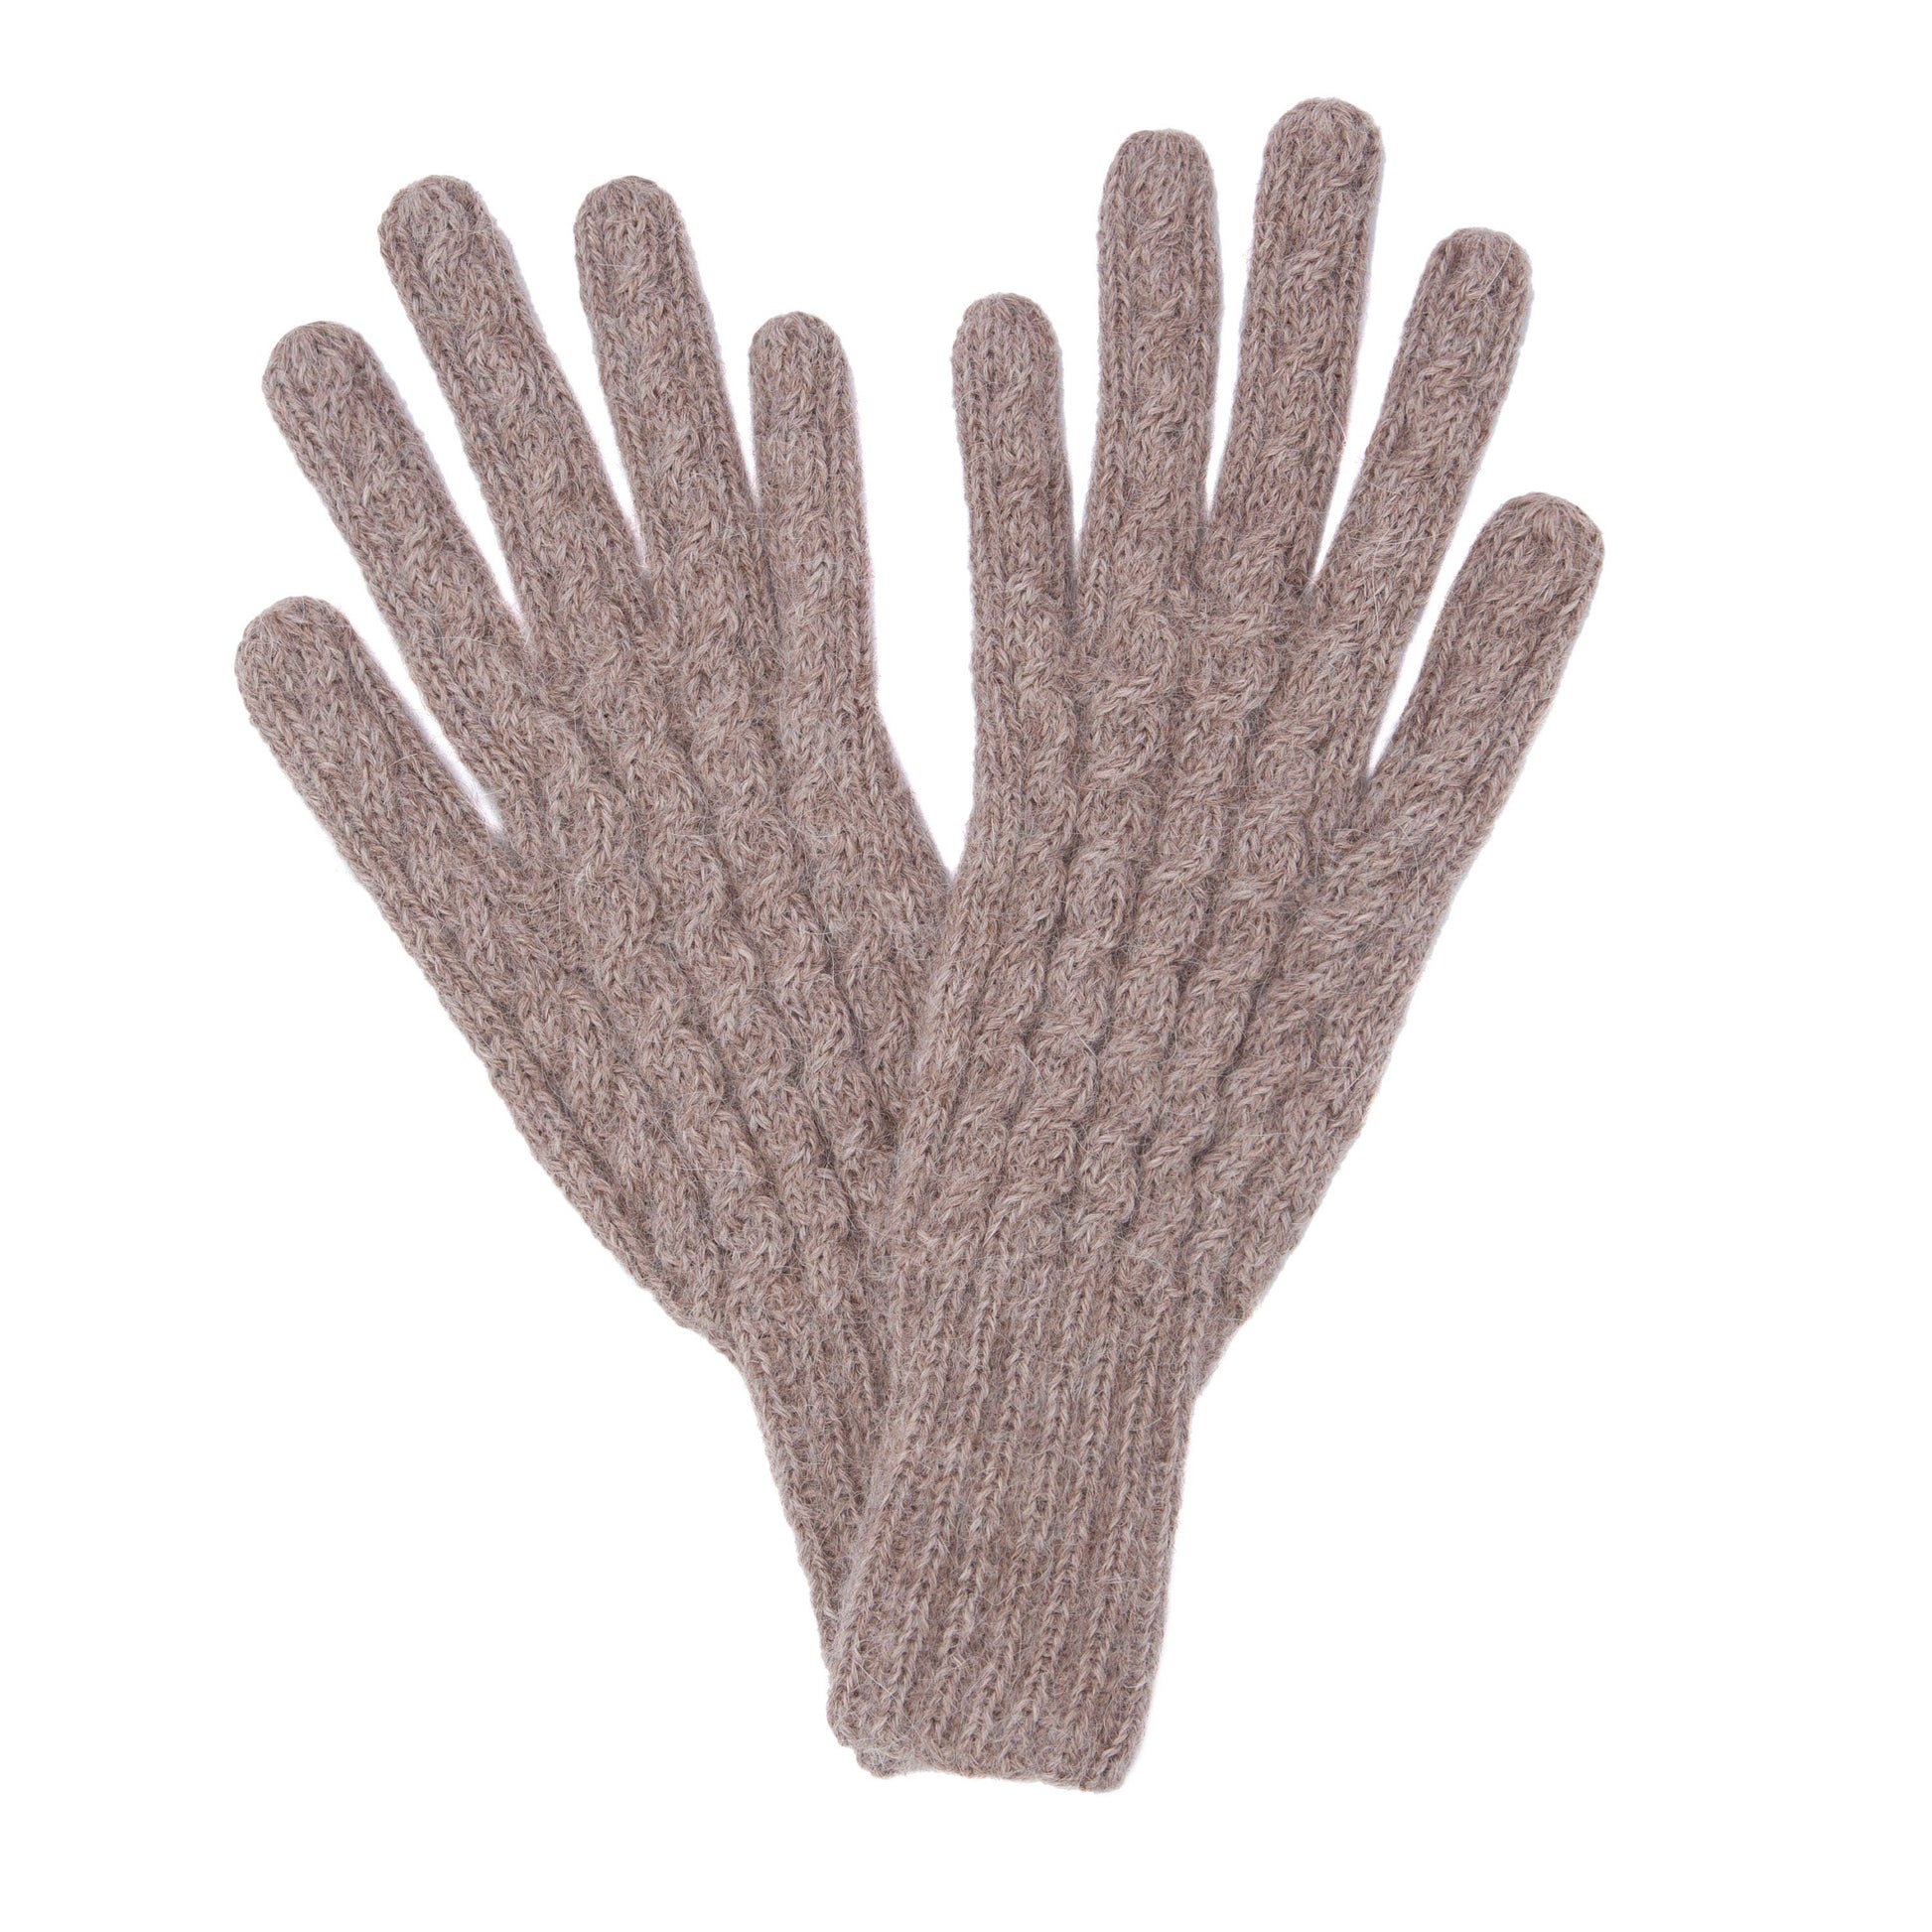 Alpaca Gloves, Winter mittens, Hand Knitted, Warm wool gloves, Ethical, Fair Trade Gift, woollen knit, eco friendly, plastic free, Raynauds